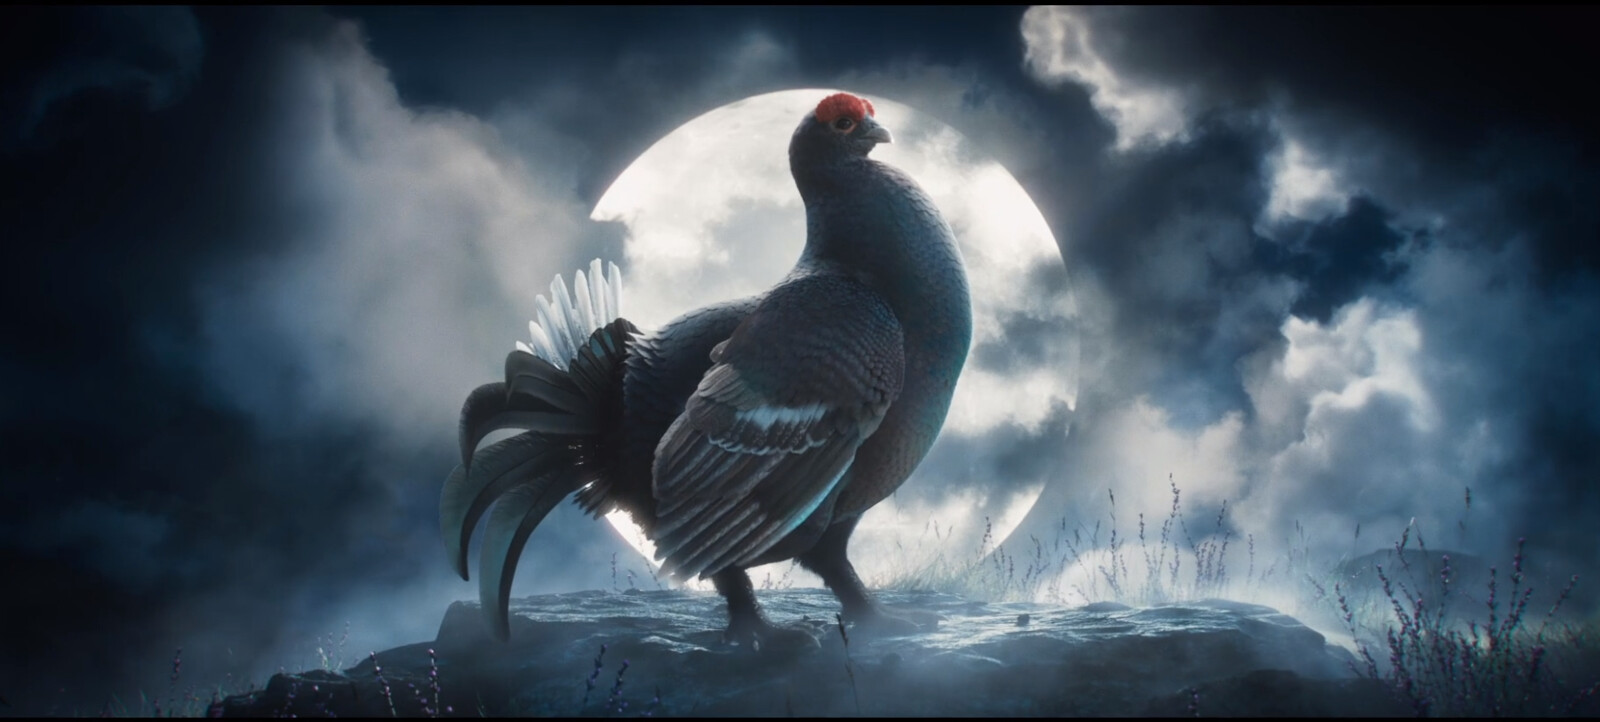 I was also in charge of modeling and texturing the weregrouse. A huge thanks to the team for their beautiful work on this commercial!